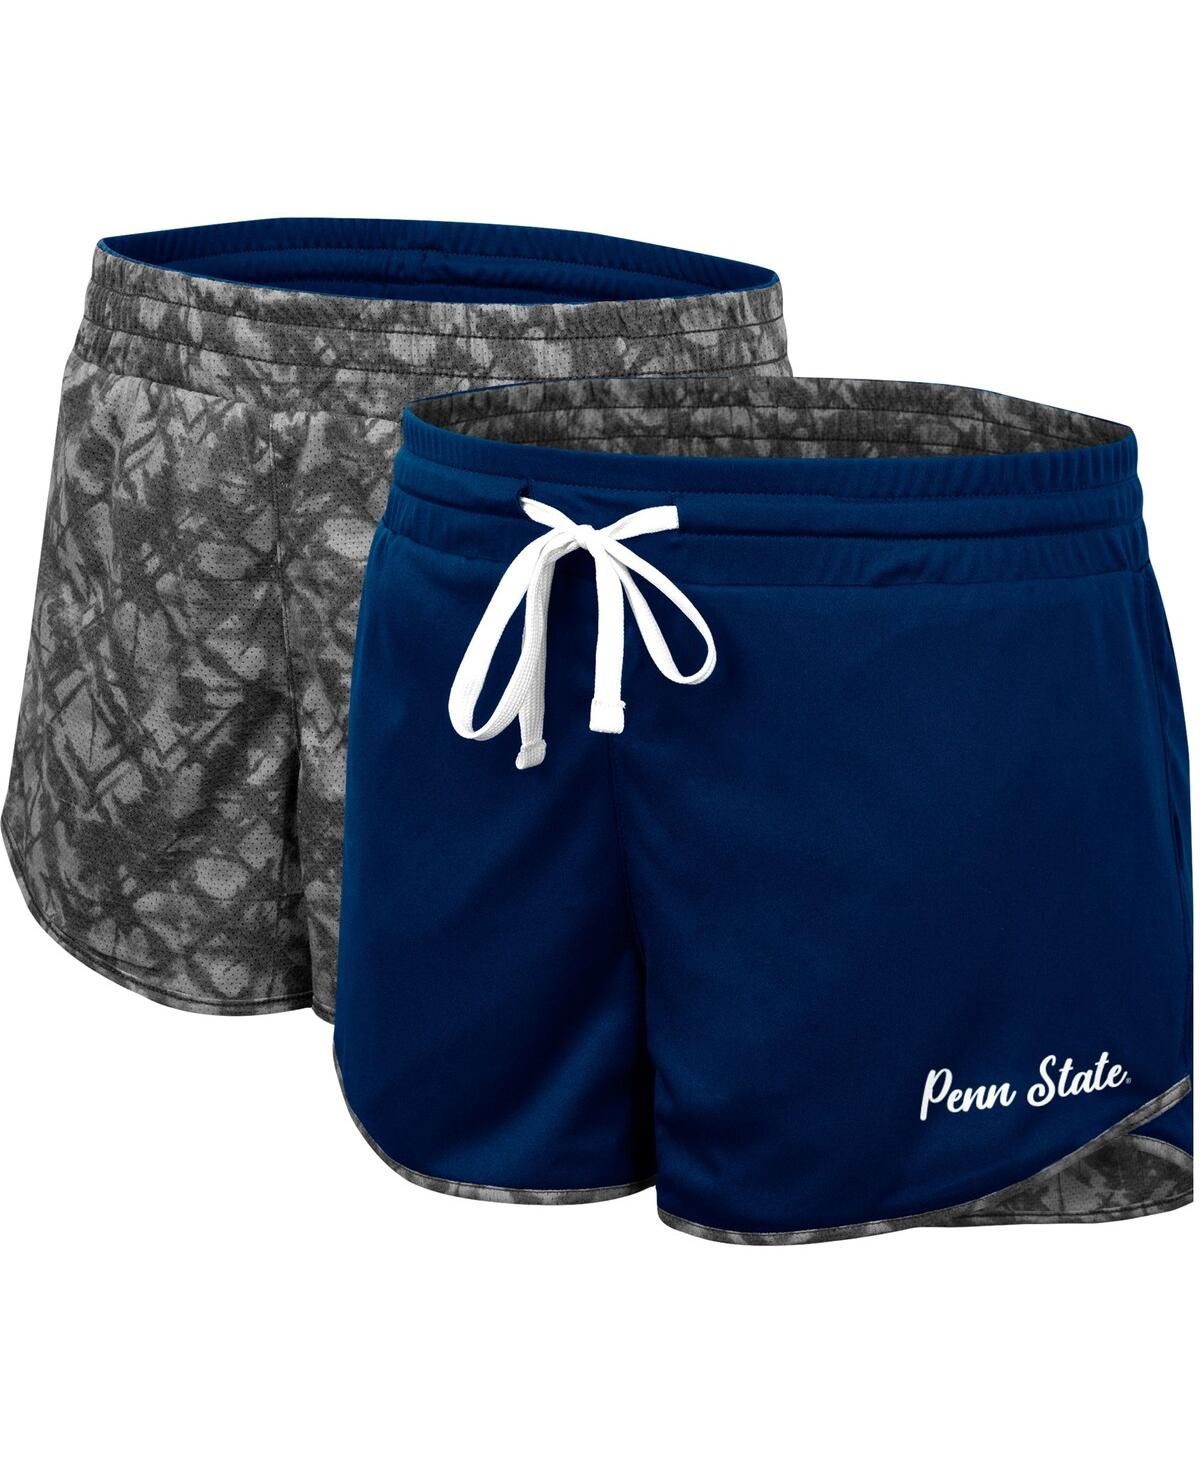 Women's Colosseum Navy, Charcoal Penn State Nittany Lions Fun Stuff Reversible Shorts - Navy, Charcoal